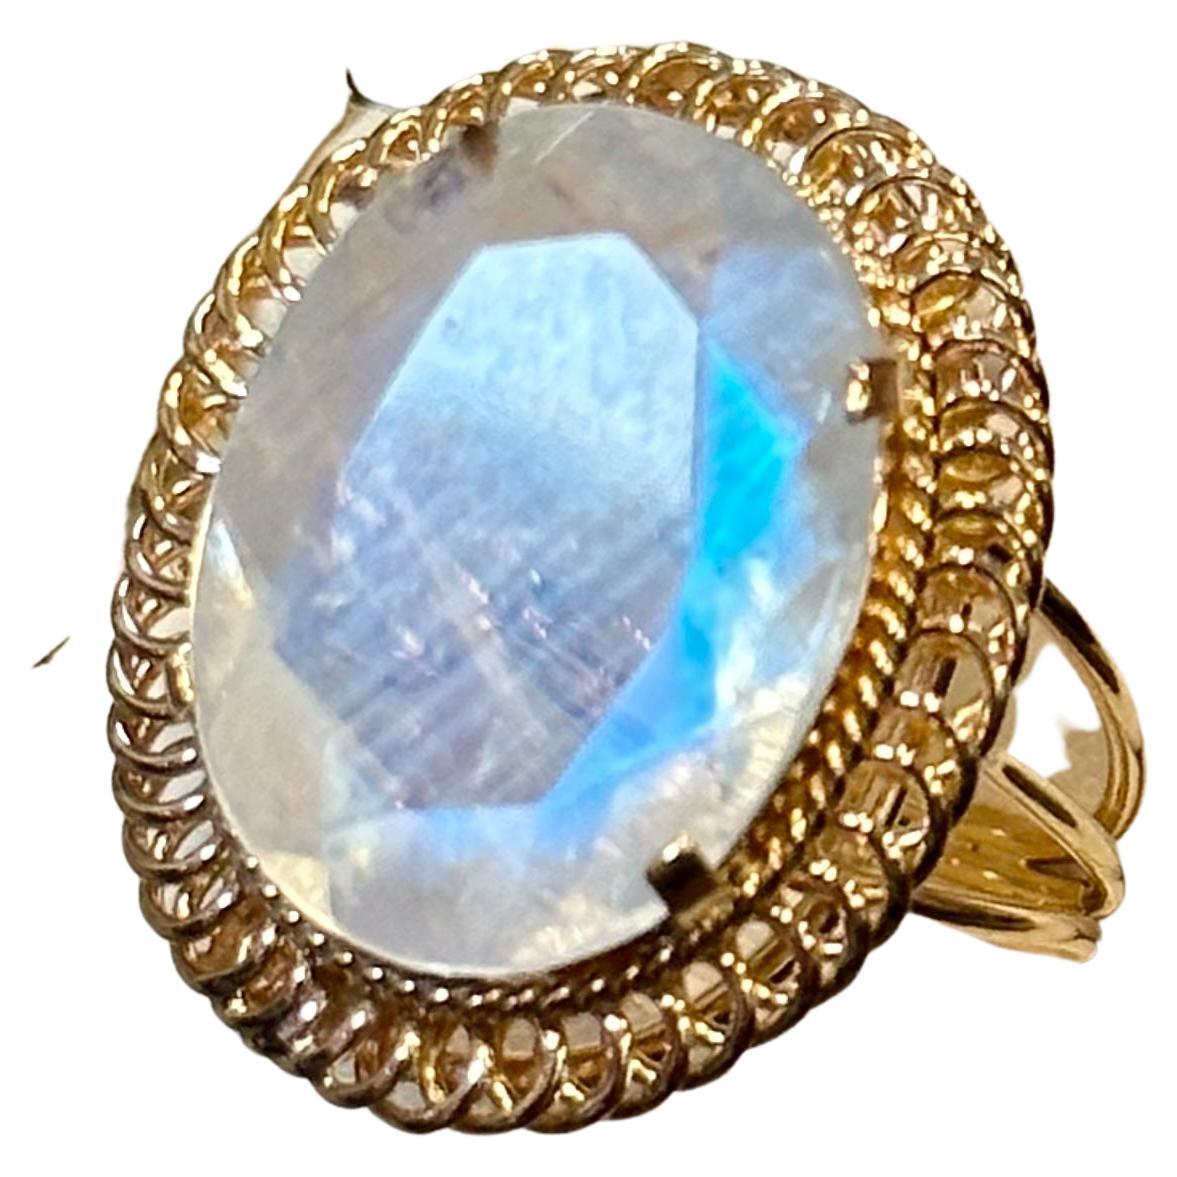 7 Carat Oval Shape Moon Stone Cocktail Ring 14 Karat Yellow Gold For Sale